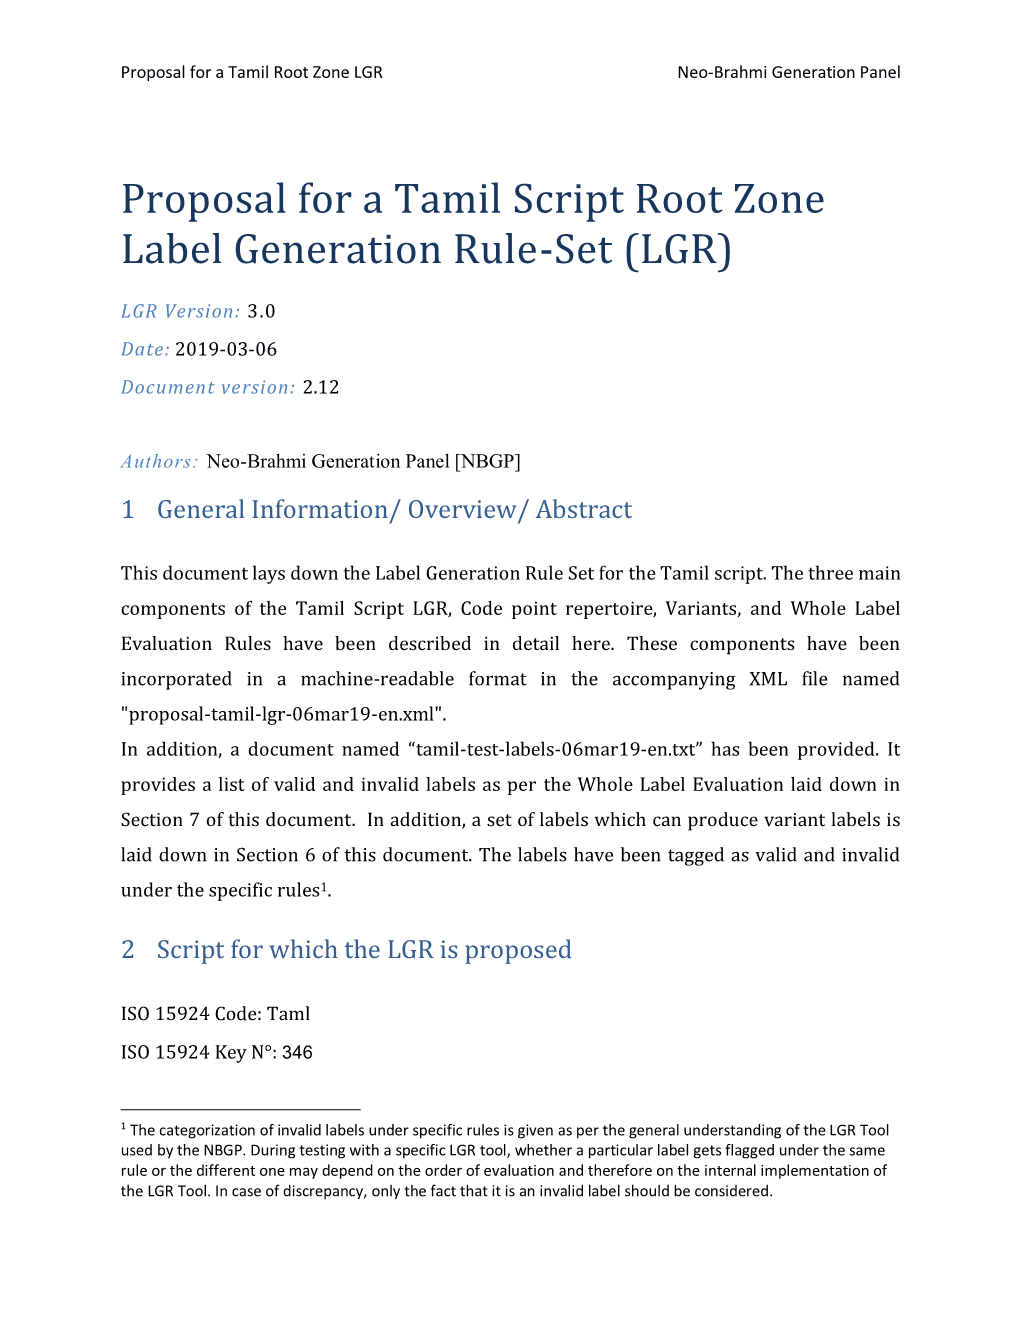 Proposal for a Tamil Script Root Zone Label Generation Rule-Set (LGR)